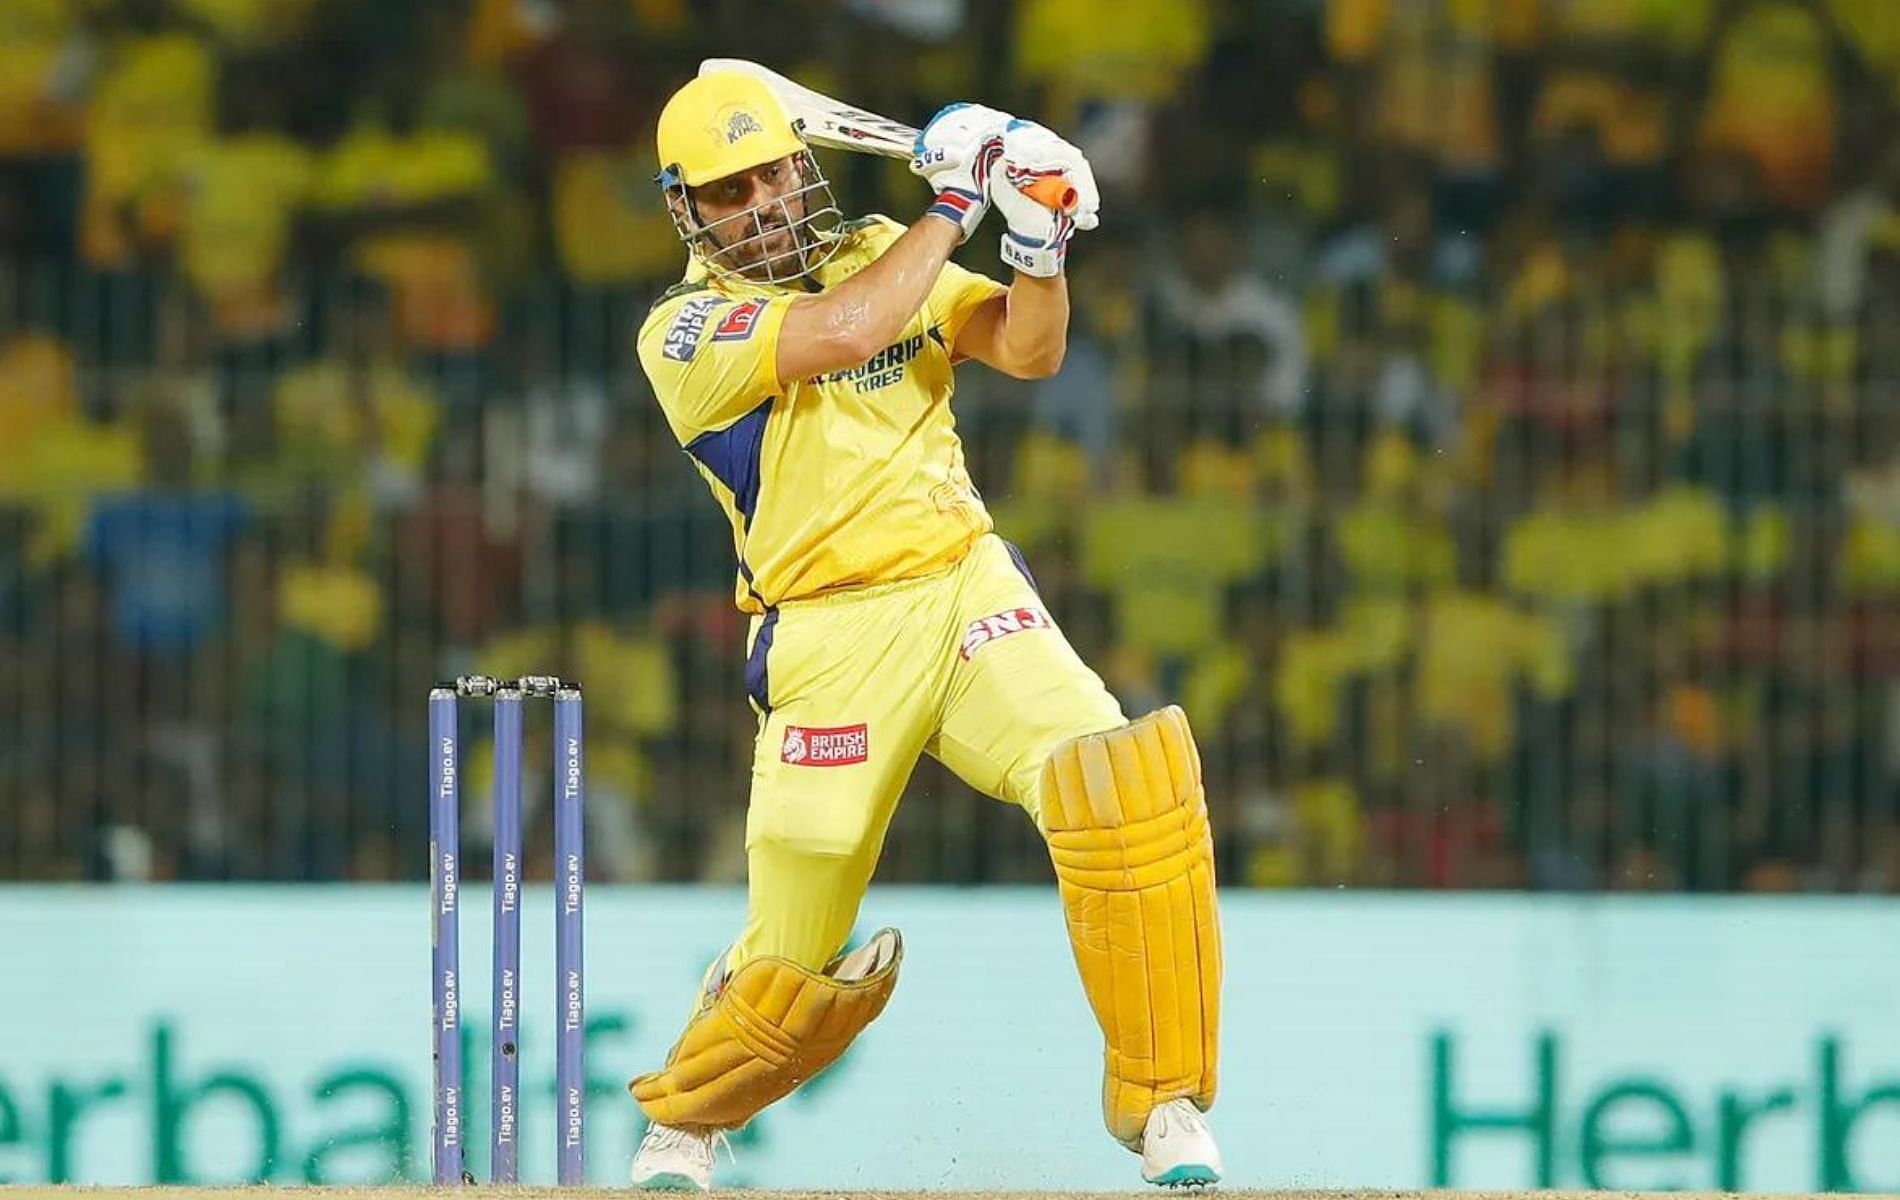 MS Dhoni in action. (Pic: IPLT20.com)